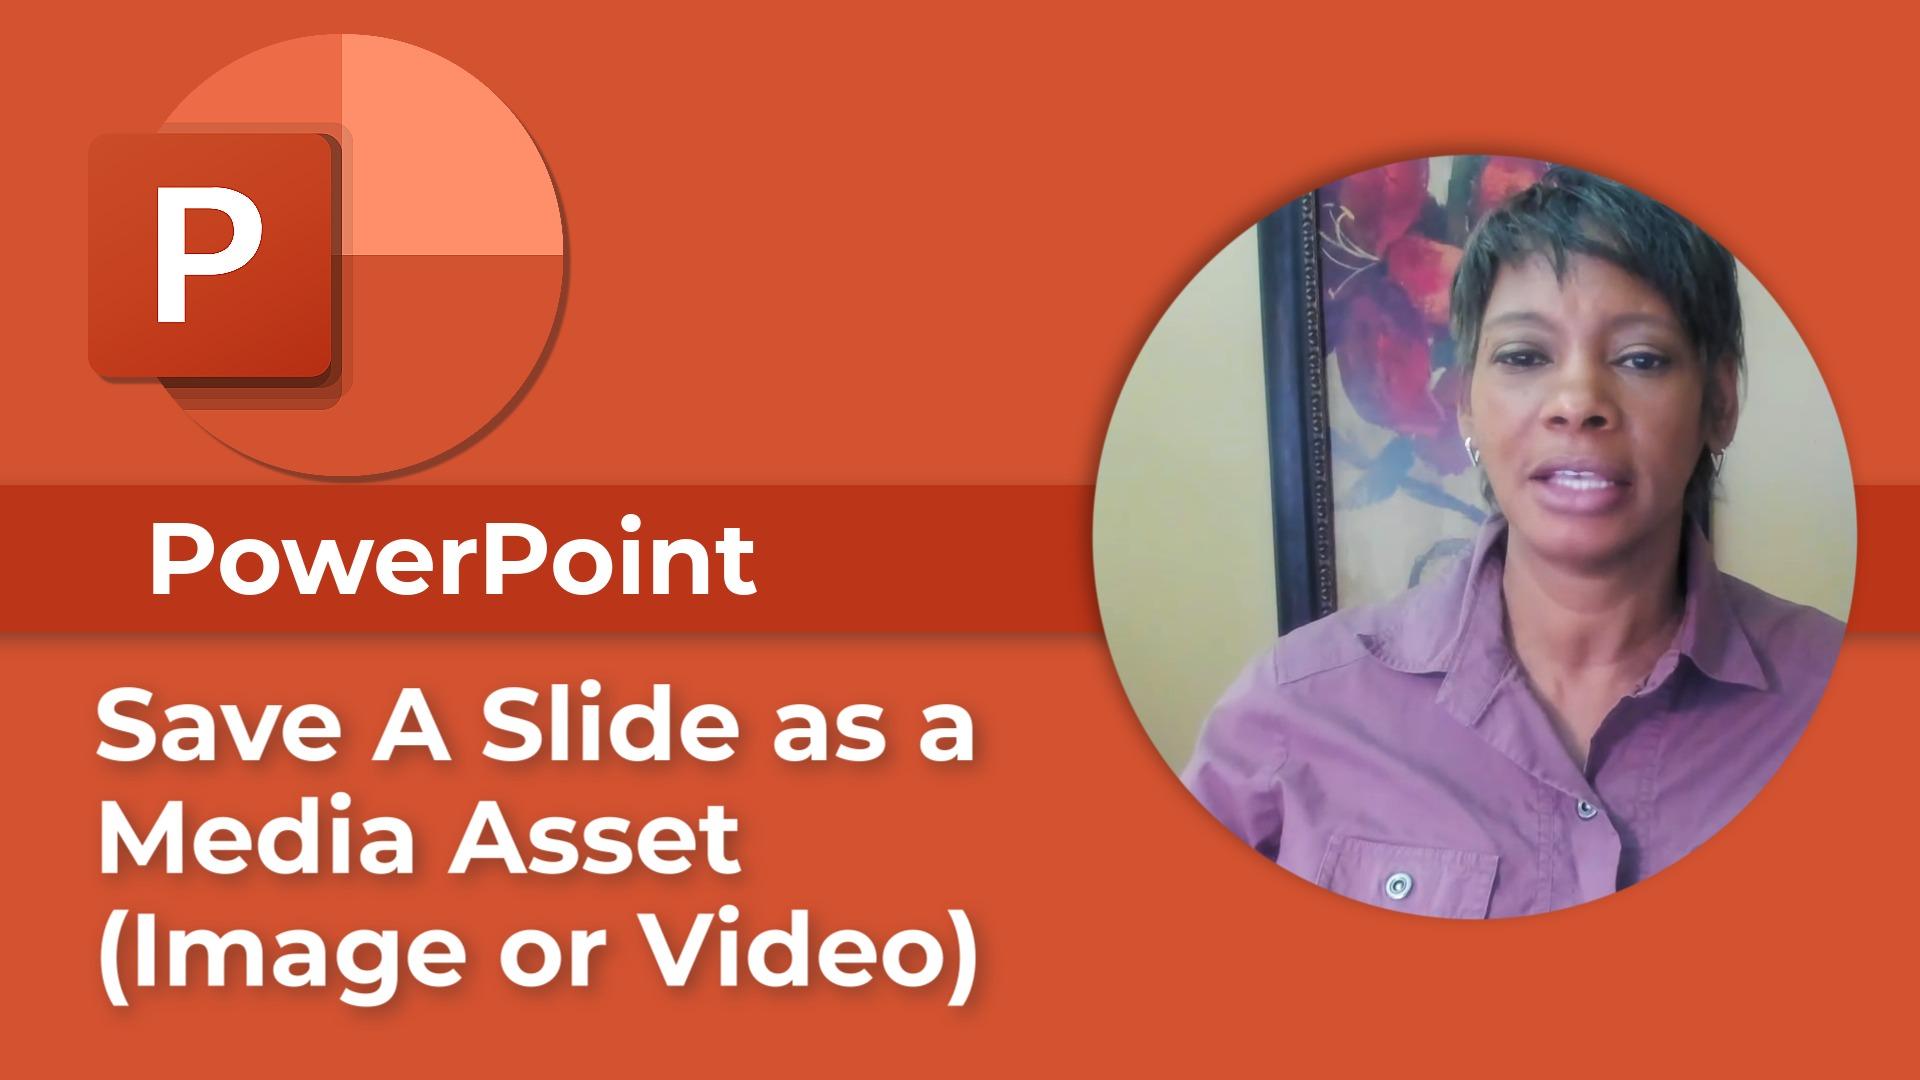 PowerPoint: Save a Slide as a Media Asset